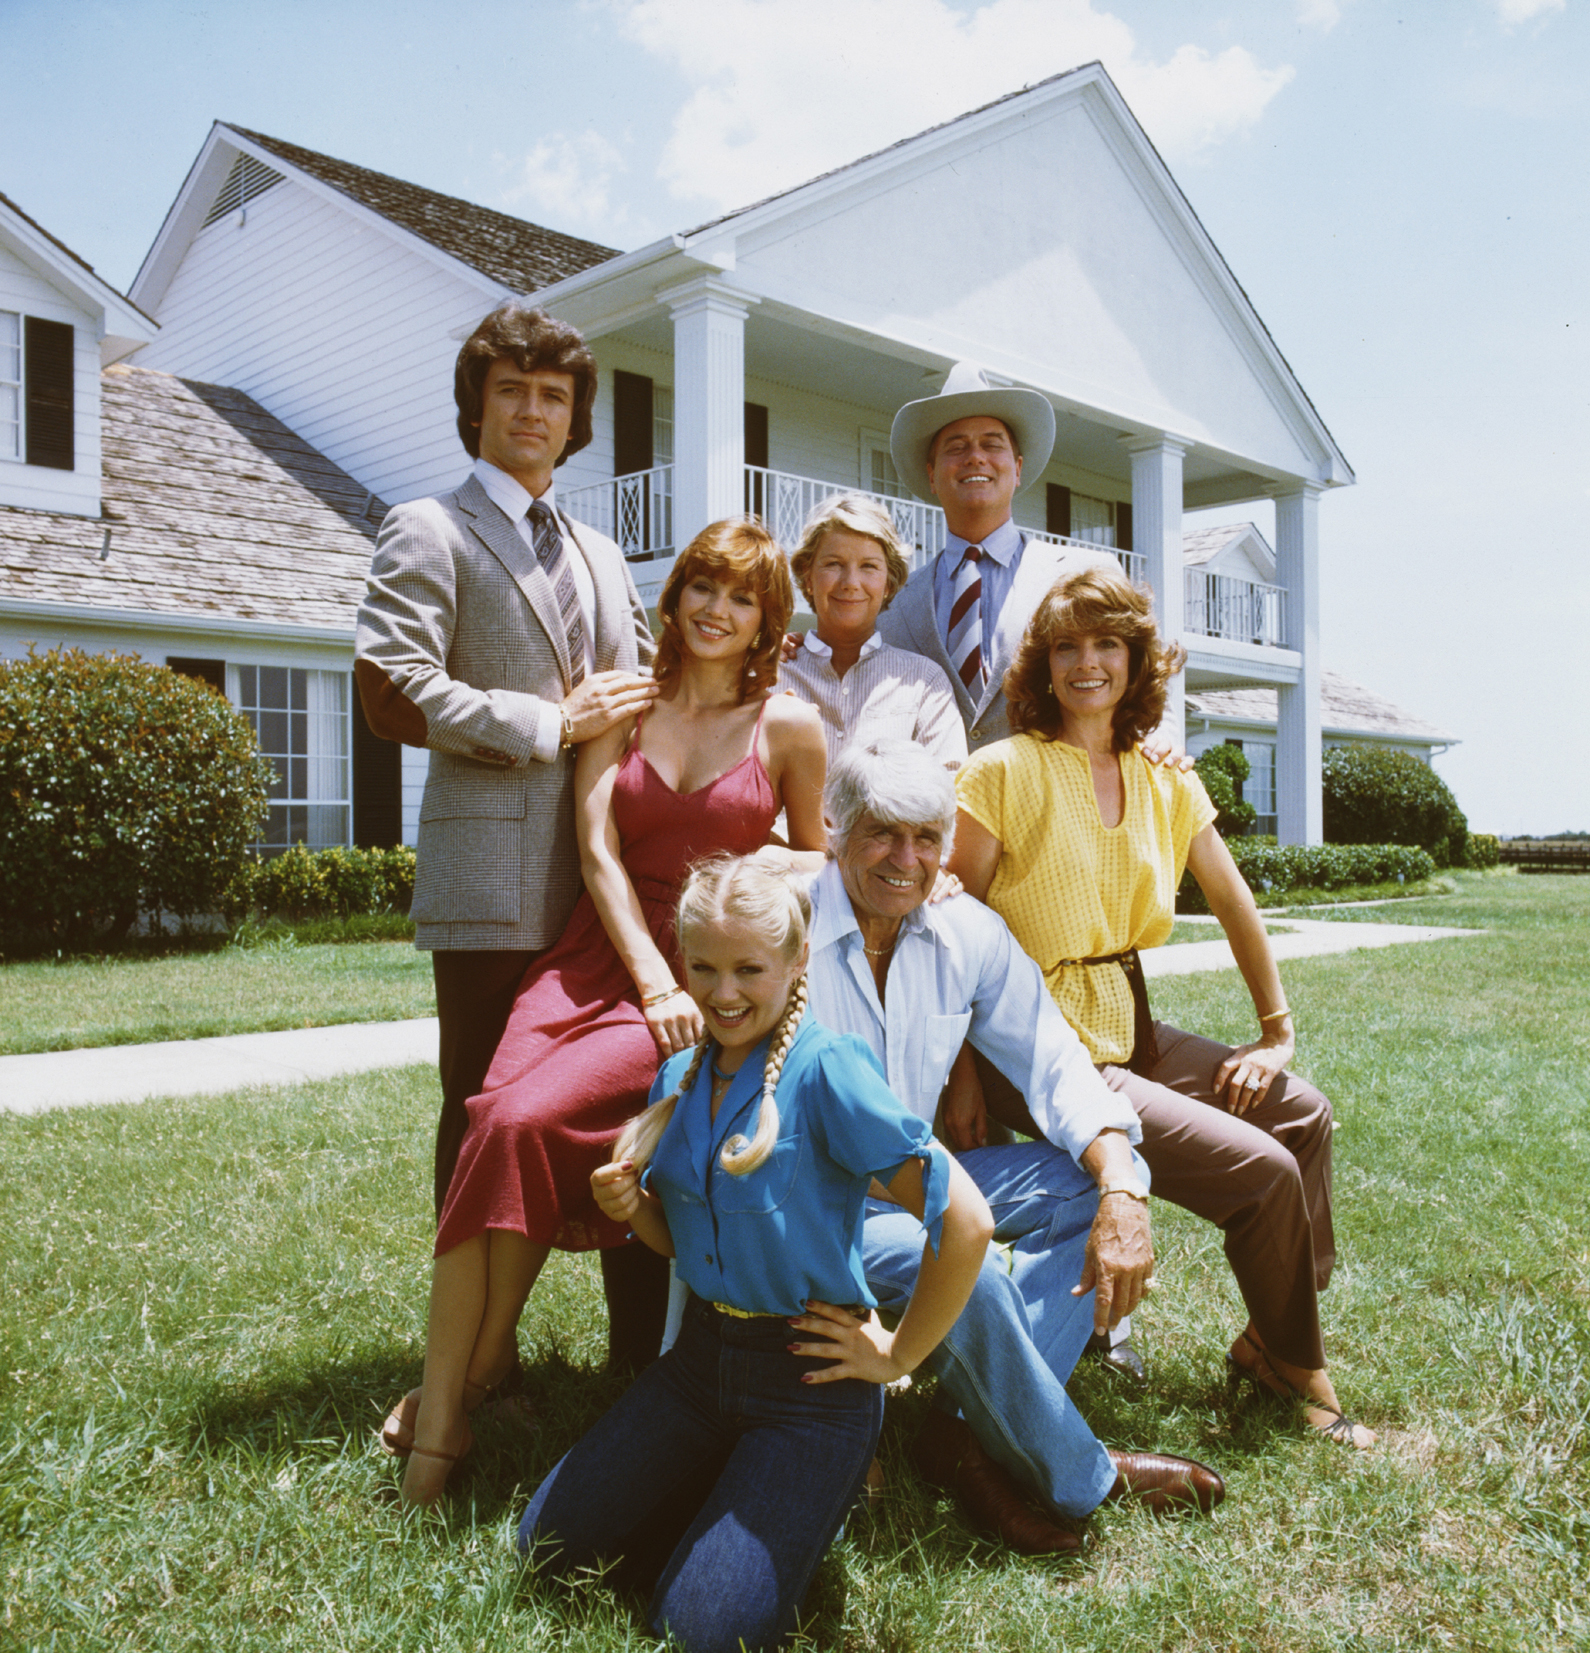 Patrick Duffy, Victoria Principal, Barbara Bel Geddes, Larry Hagman, Charlene Tilton, Jim Davis, and Linda Gray pose in front of their television home, the Southfork Ranch, Dallas, Texas, 1979. | Source: Getty Images